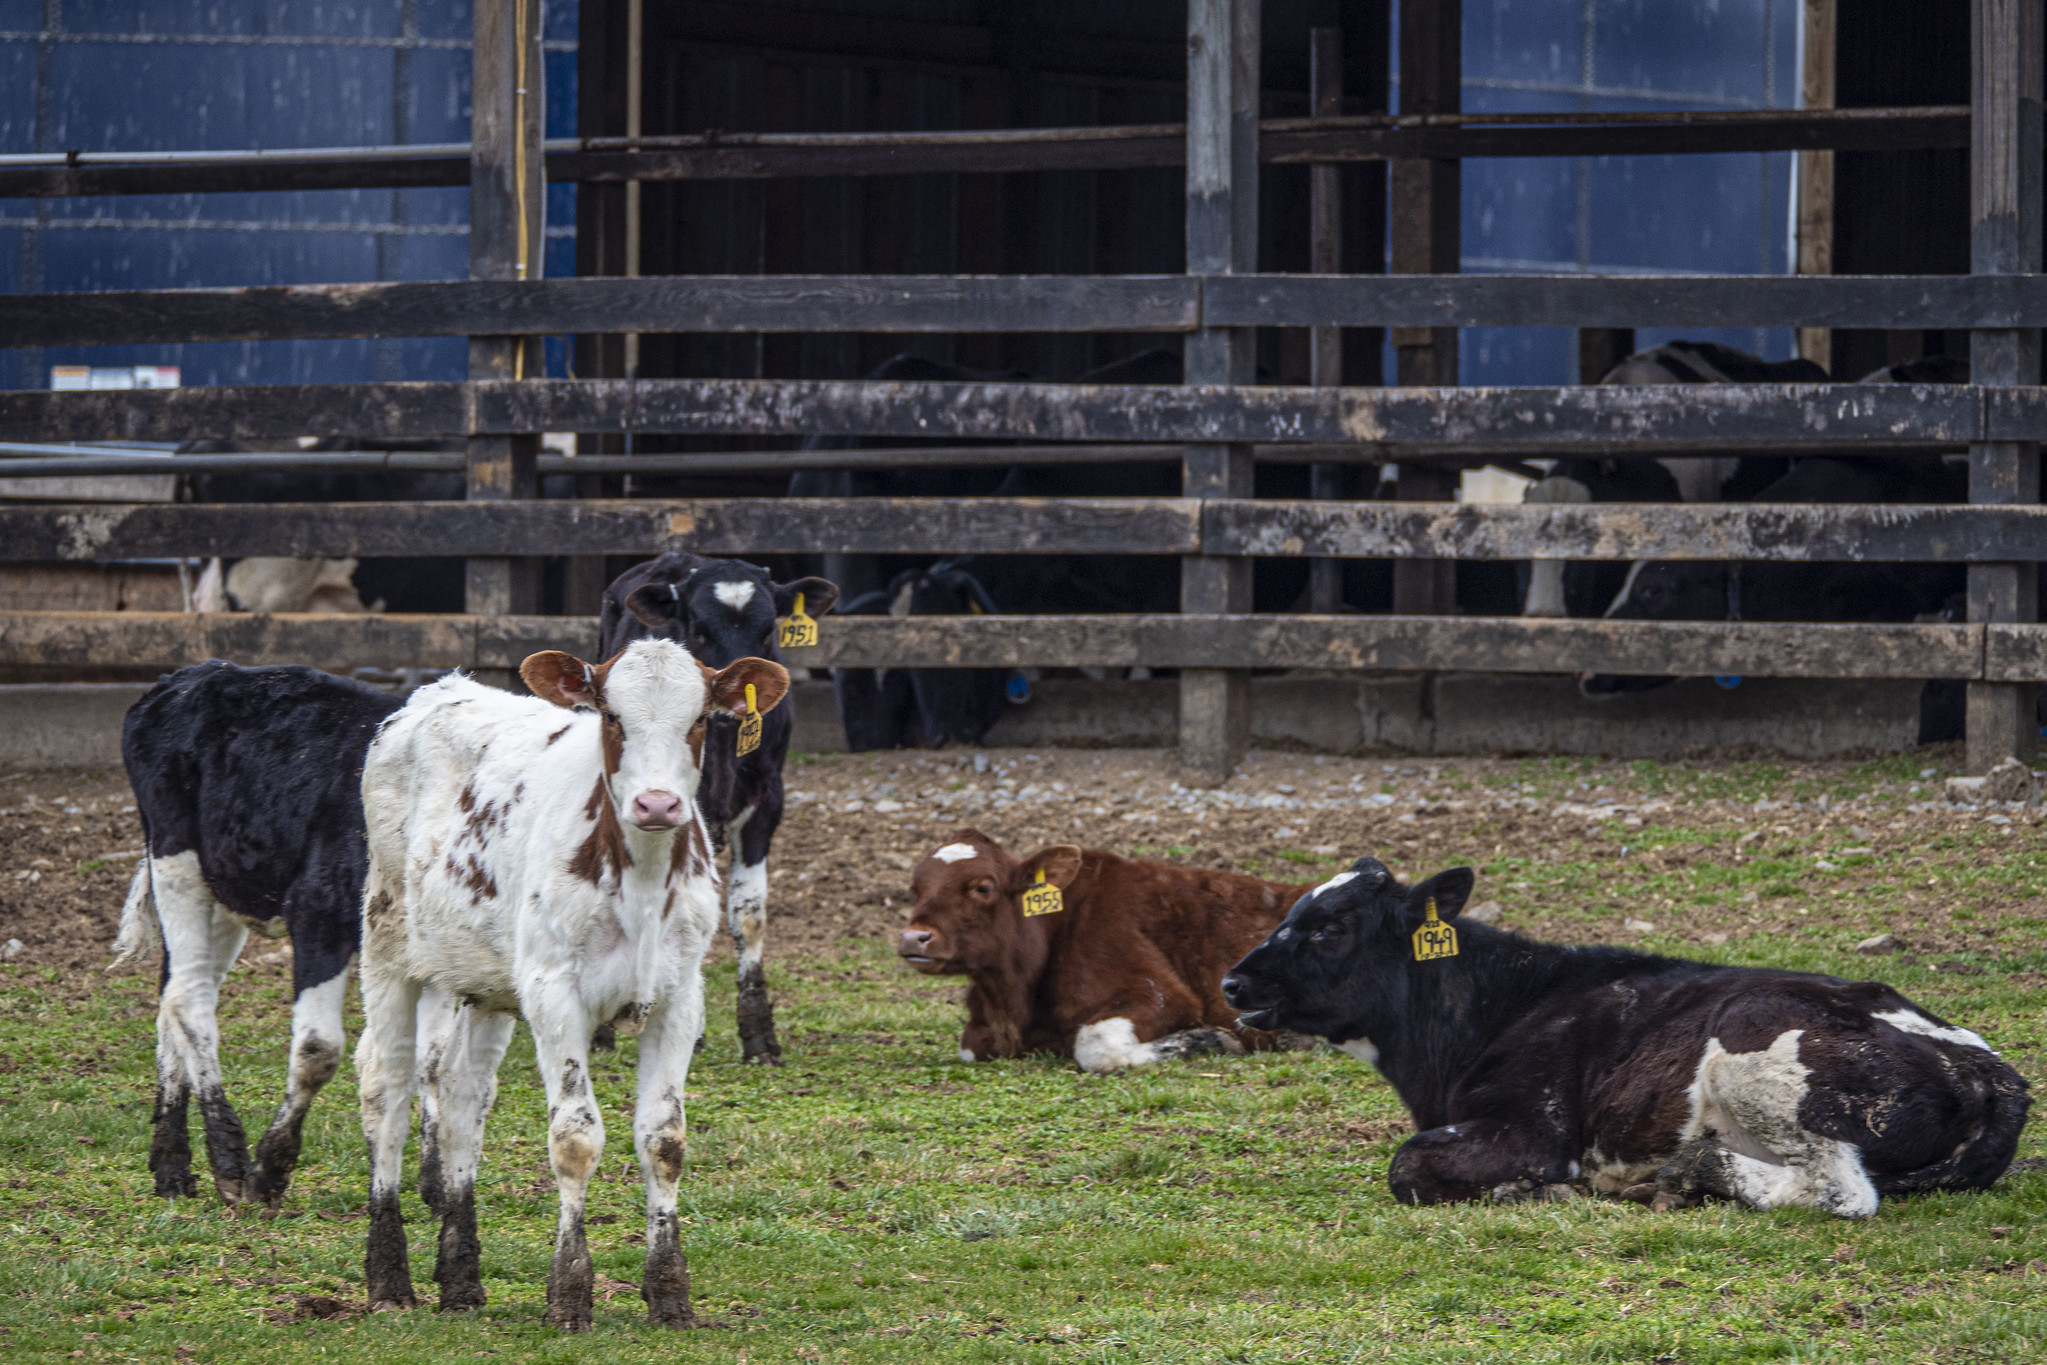 A small group of dairy cattle resting in a pen.